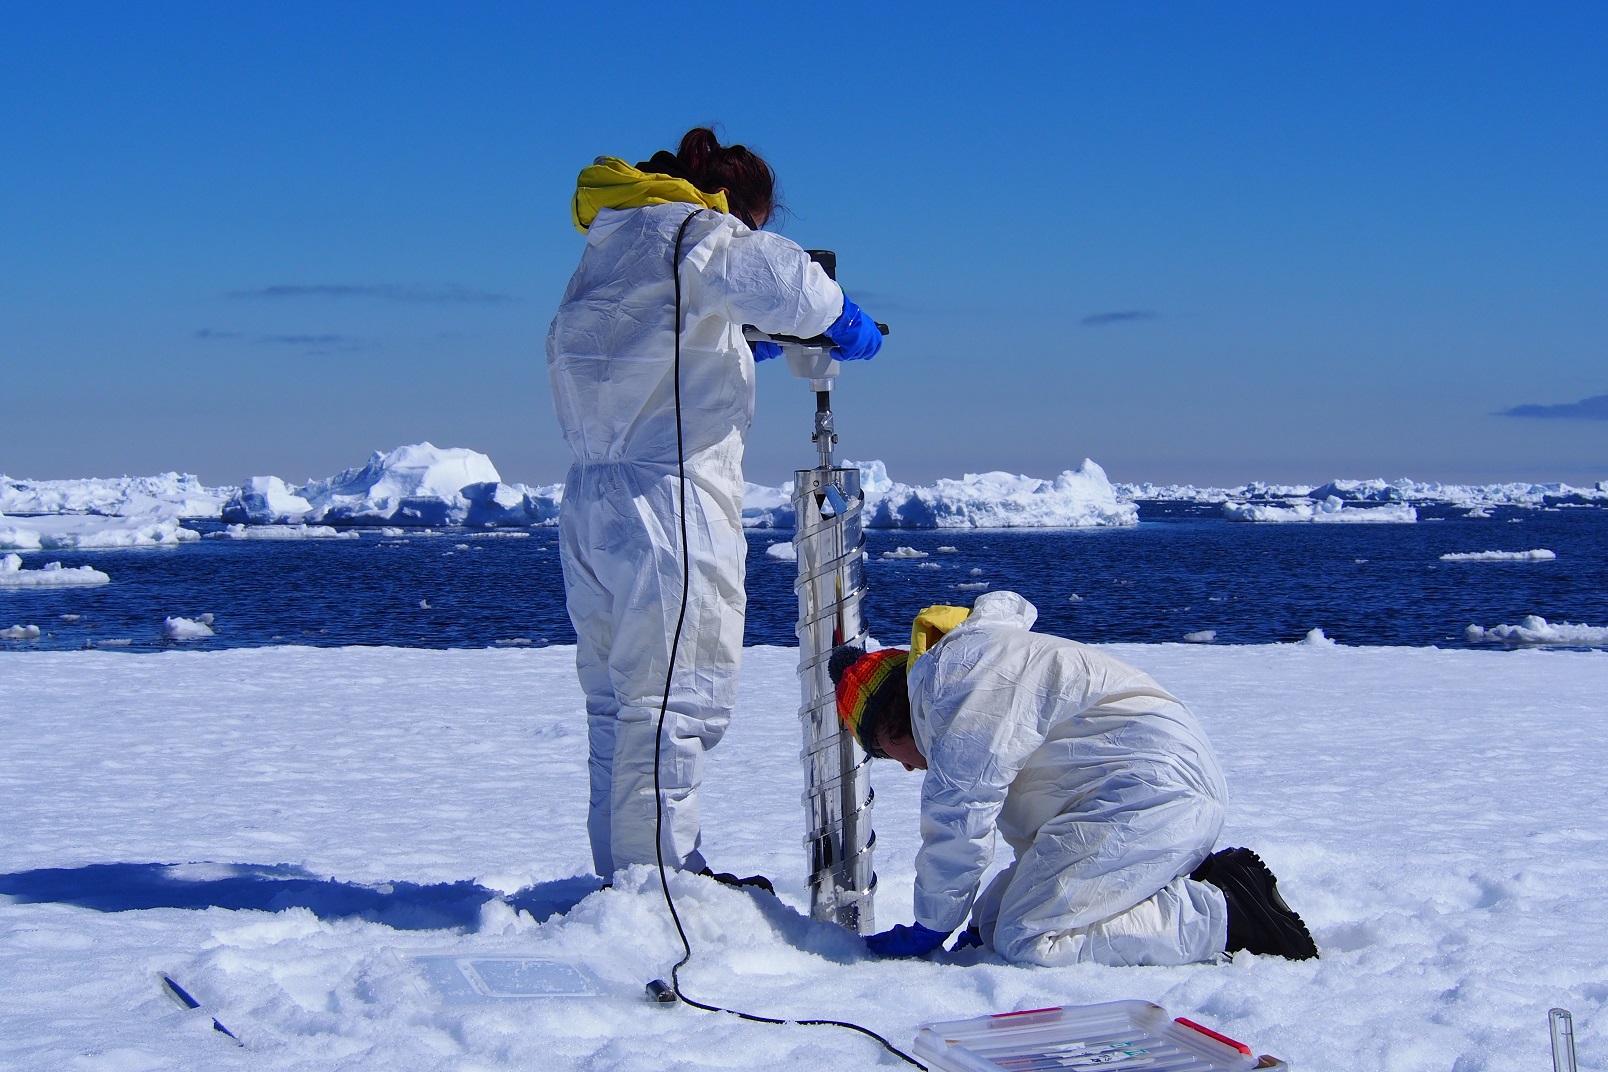 Thumbnail for $20m boost for Antarctic research